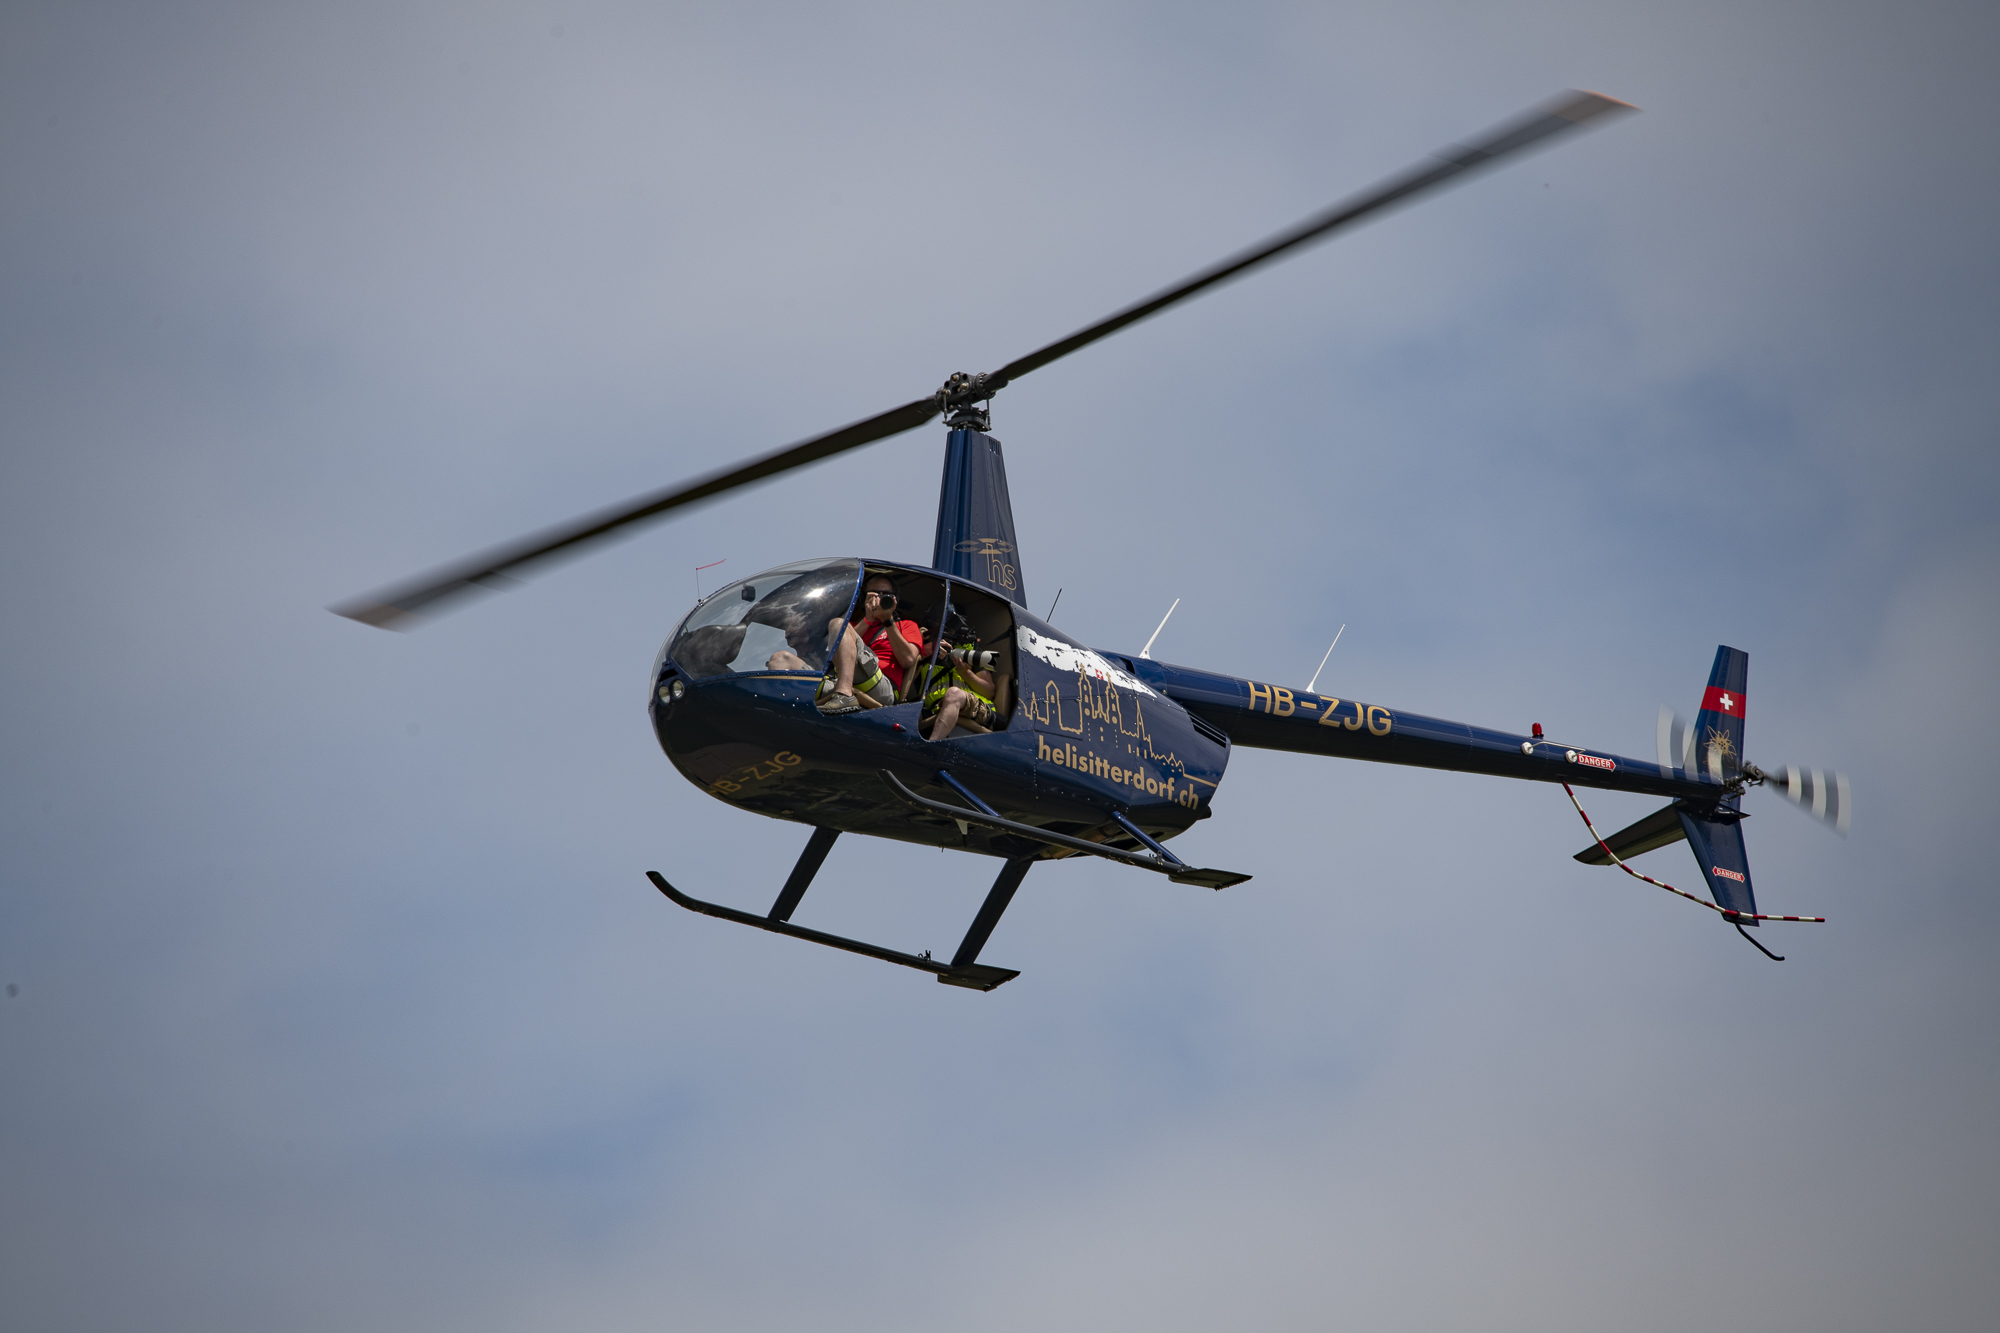 Robinson R44 Raven II Helicopter with photographers on board